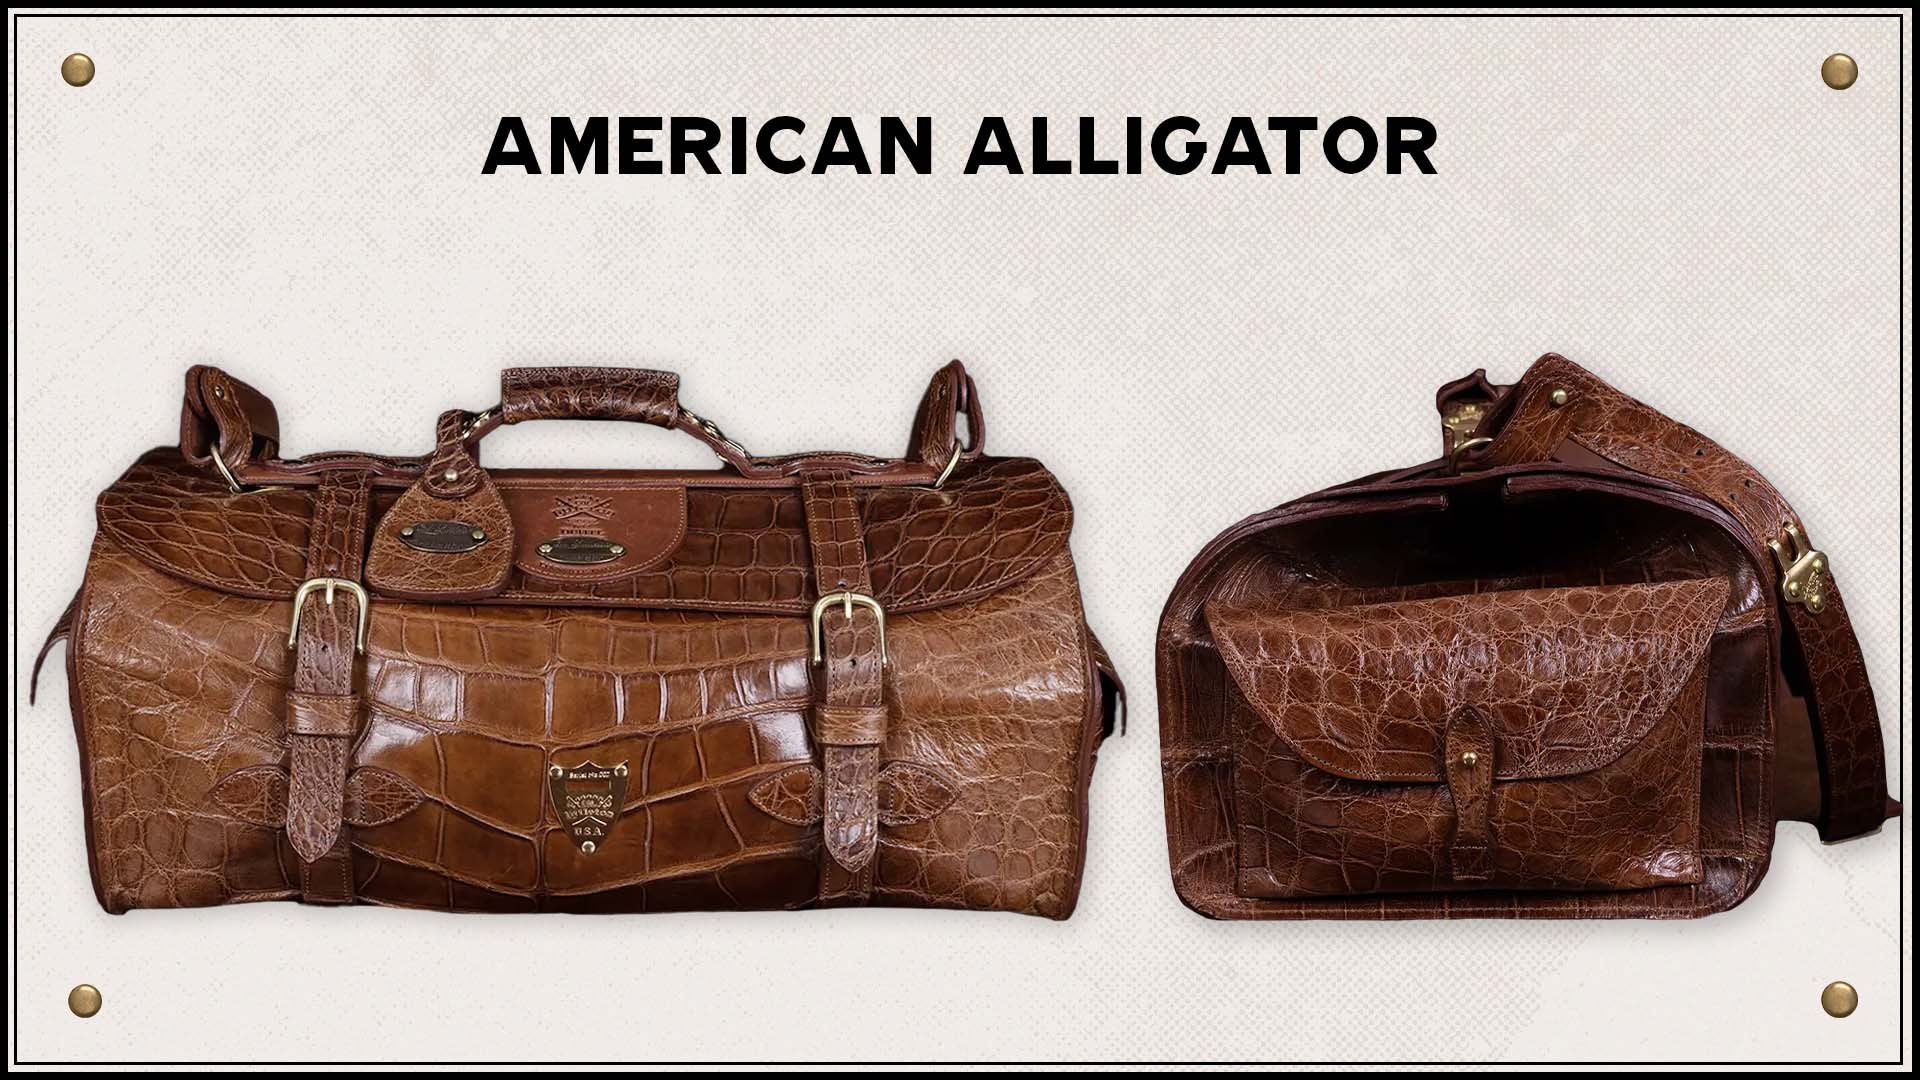 No. 2 Duffel Bag front and side view in American Alligator